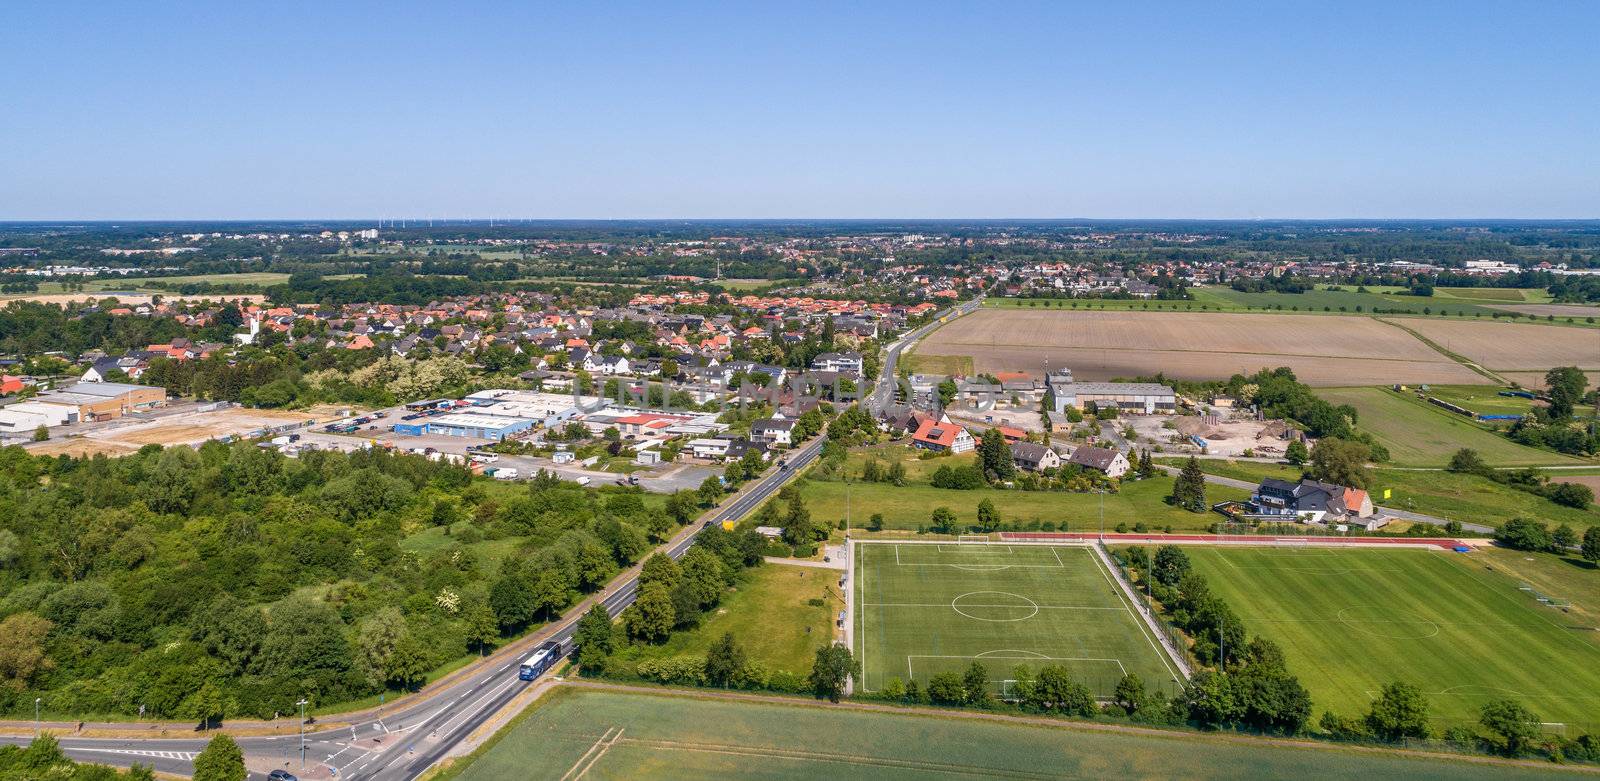 Aerial view of an industrial estate on the outskirts of Wolfsburg, Germany, with a football pitch in the foreground by geogif